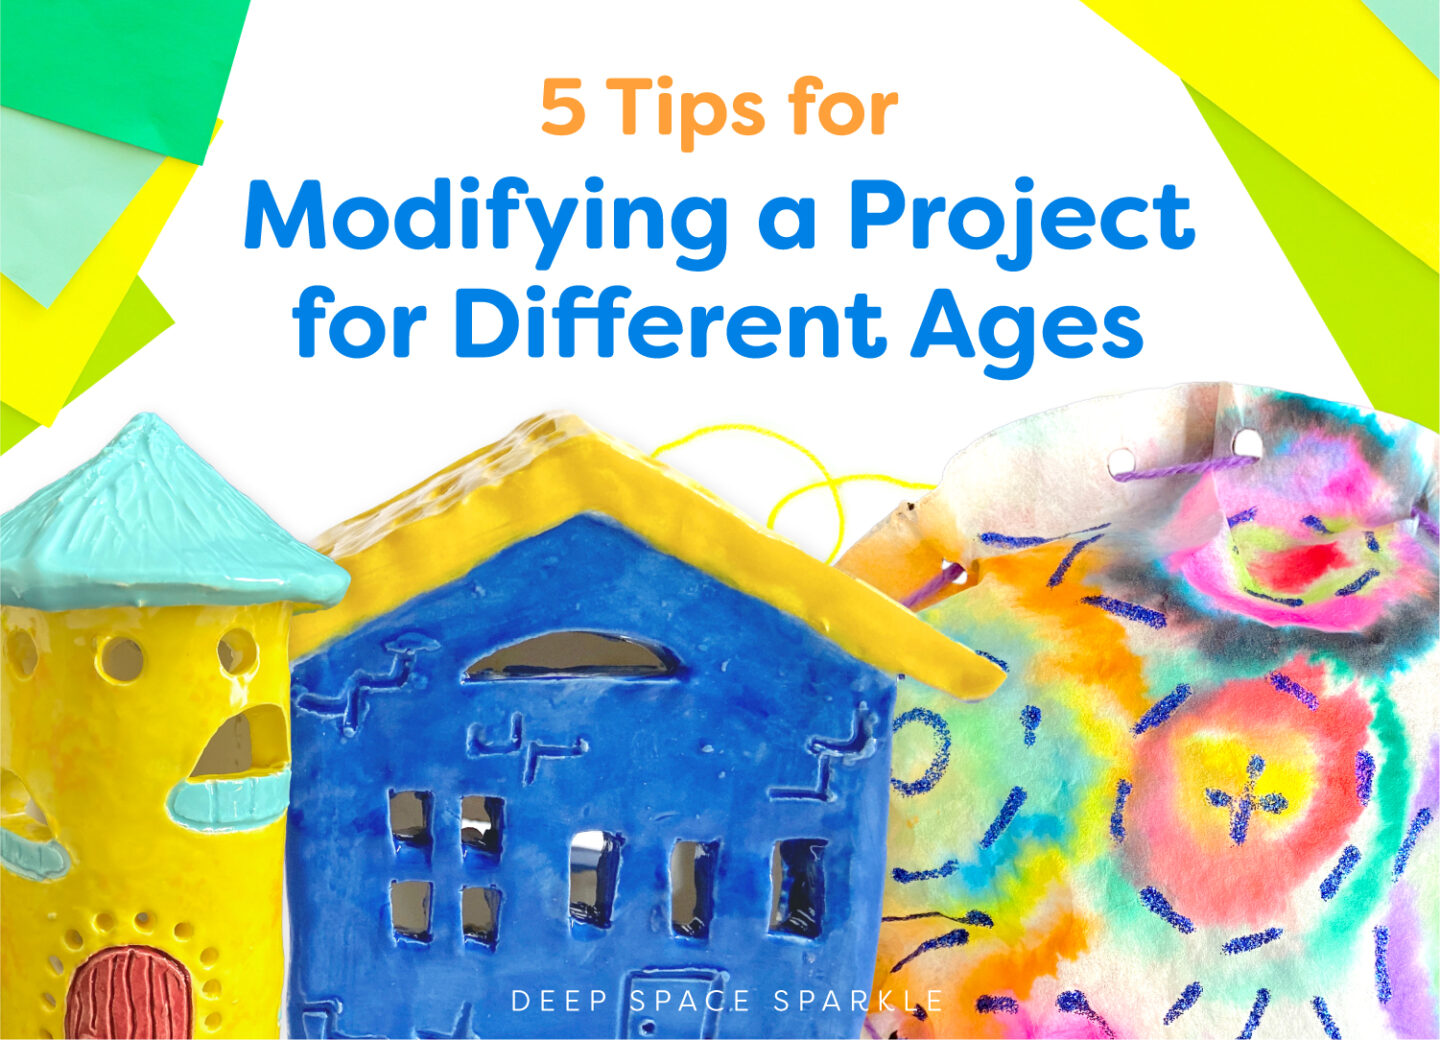 5 Tips for Modifying a Project for Different Ages